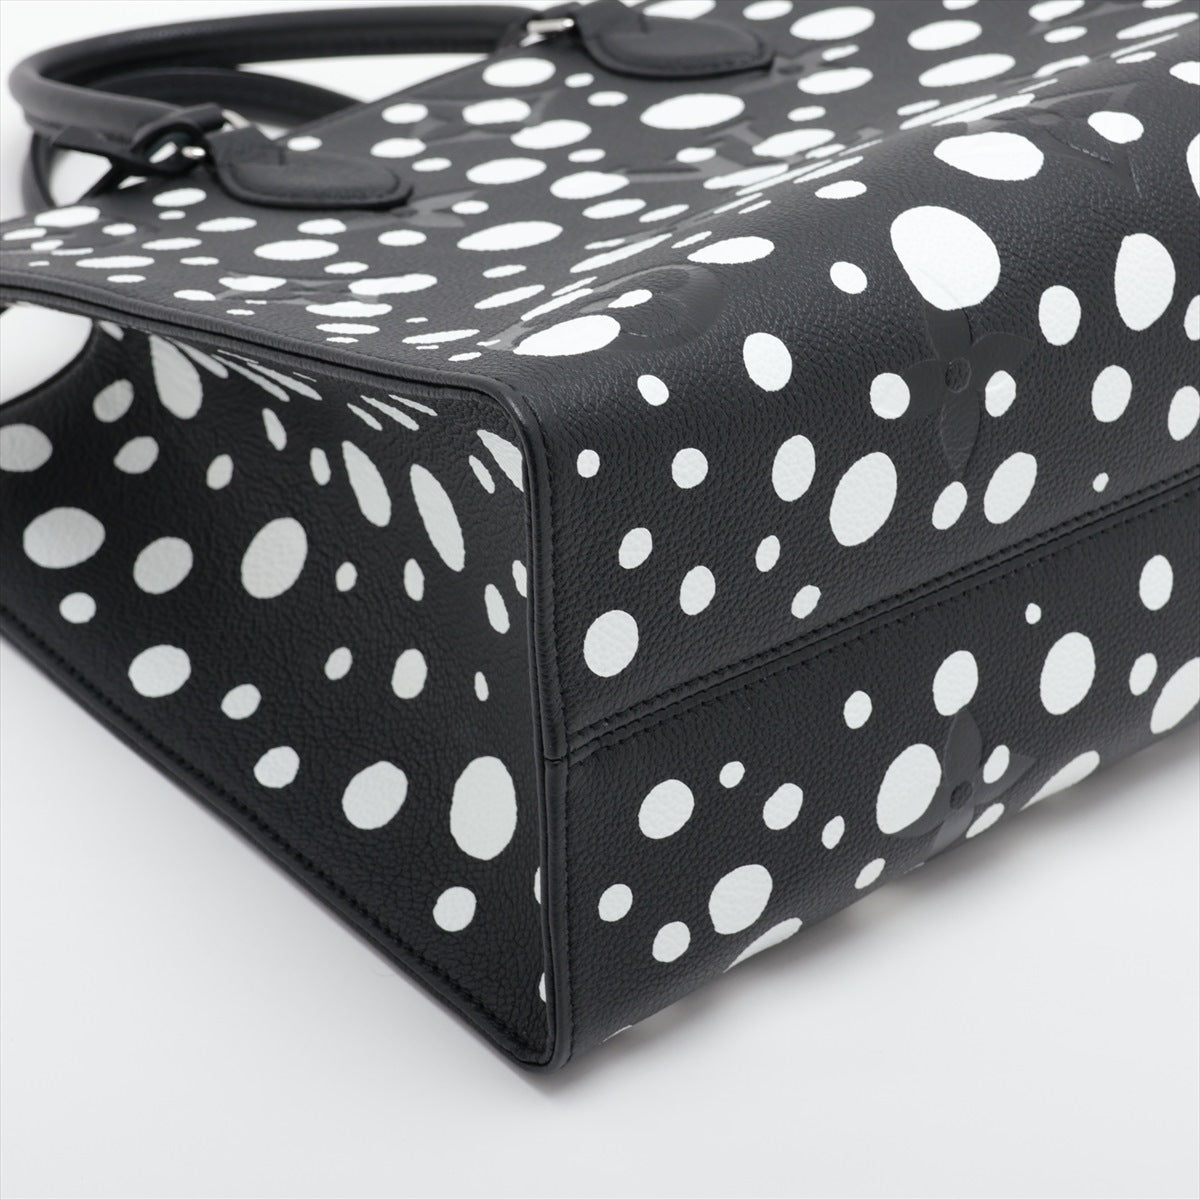 Louis Vuitton x Yayoi Kusama On the Go MM M46389 Tote bag Black There was an RFID response